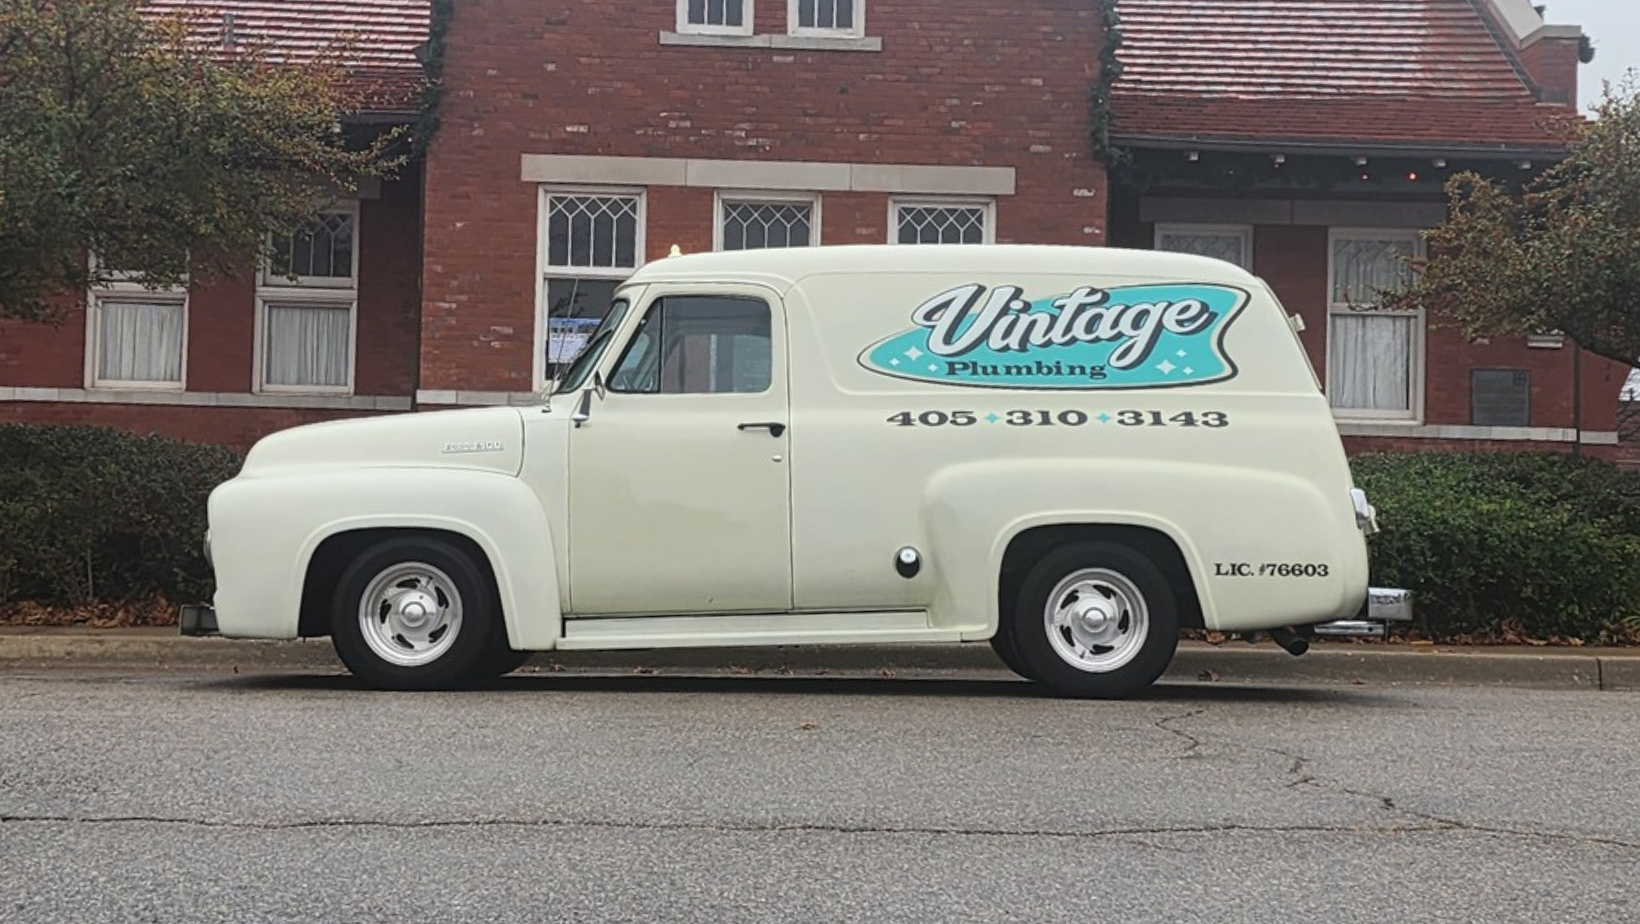 Vintage Plumbing: Reinventing the Trade with a Focus on Community and Quality